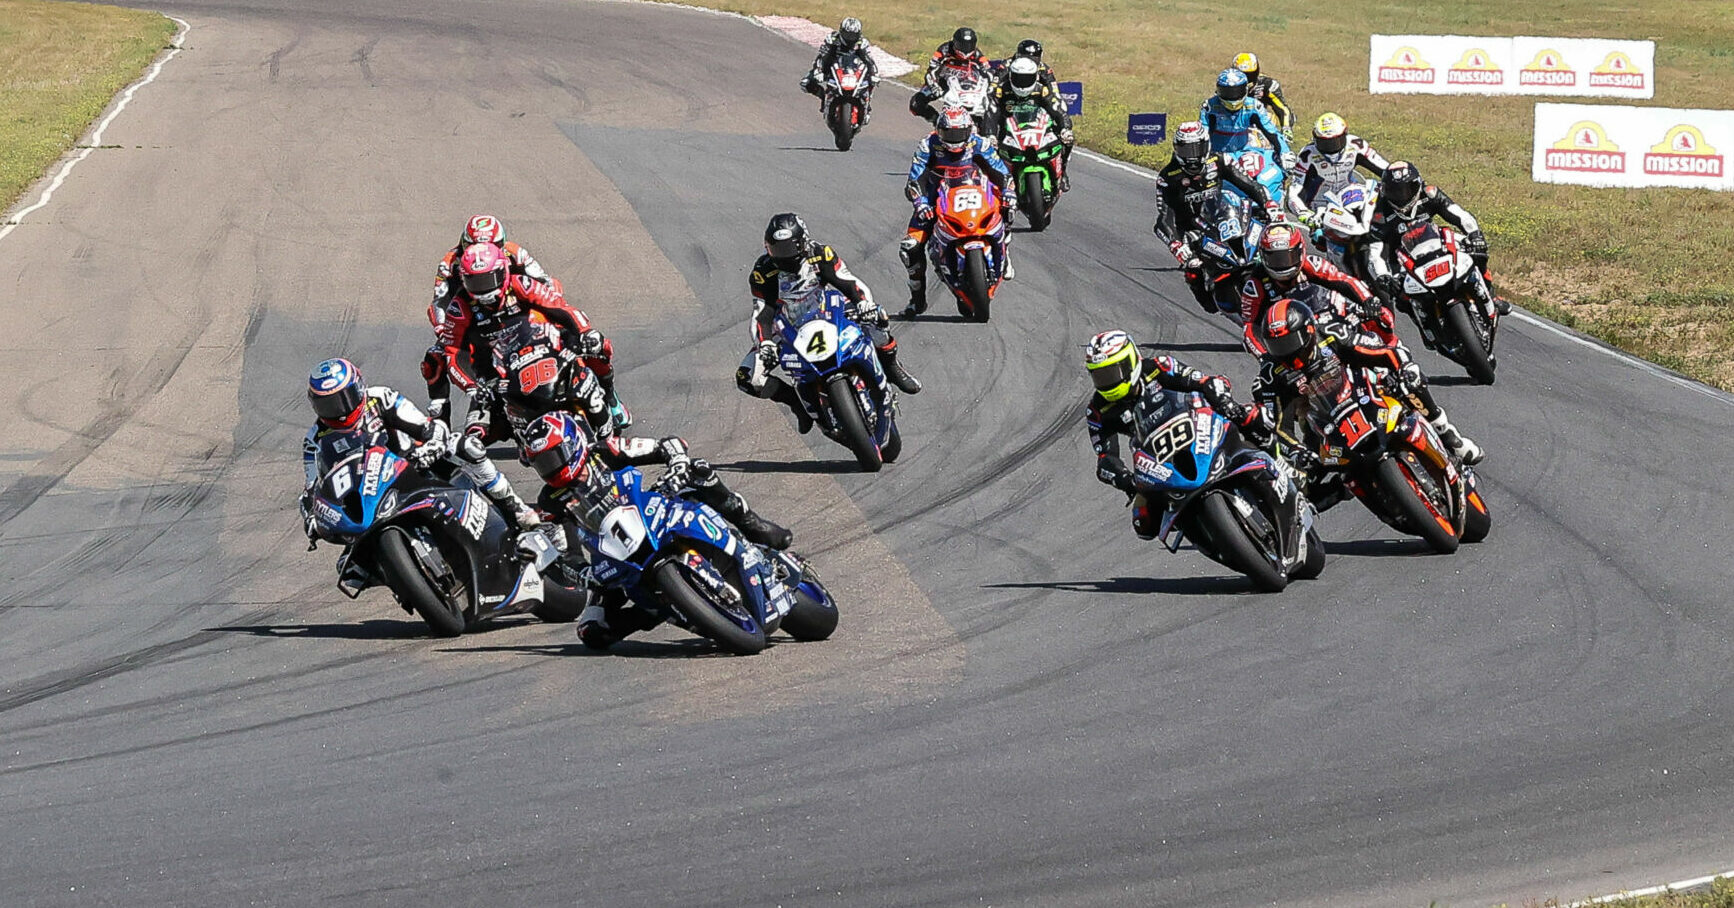 Jake Gagne (1) leads the start of MotoAmerica Superbike Race One at Brainerd, before it all went bad for Cameron Beaubier (6) and Mathew Scholtz (11). Photo by Brian J. Nelson.